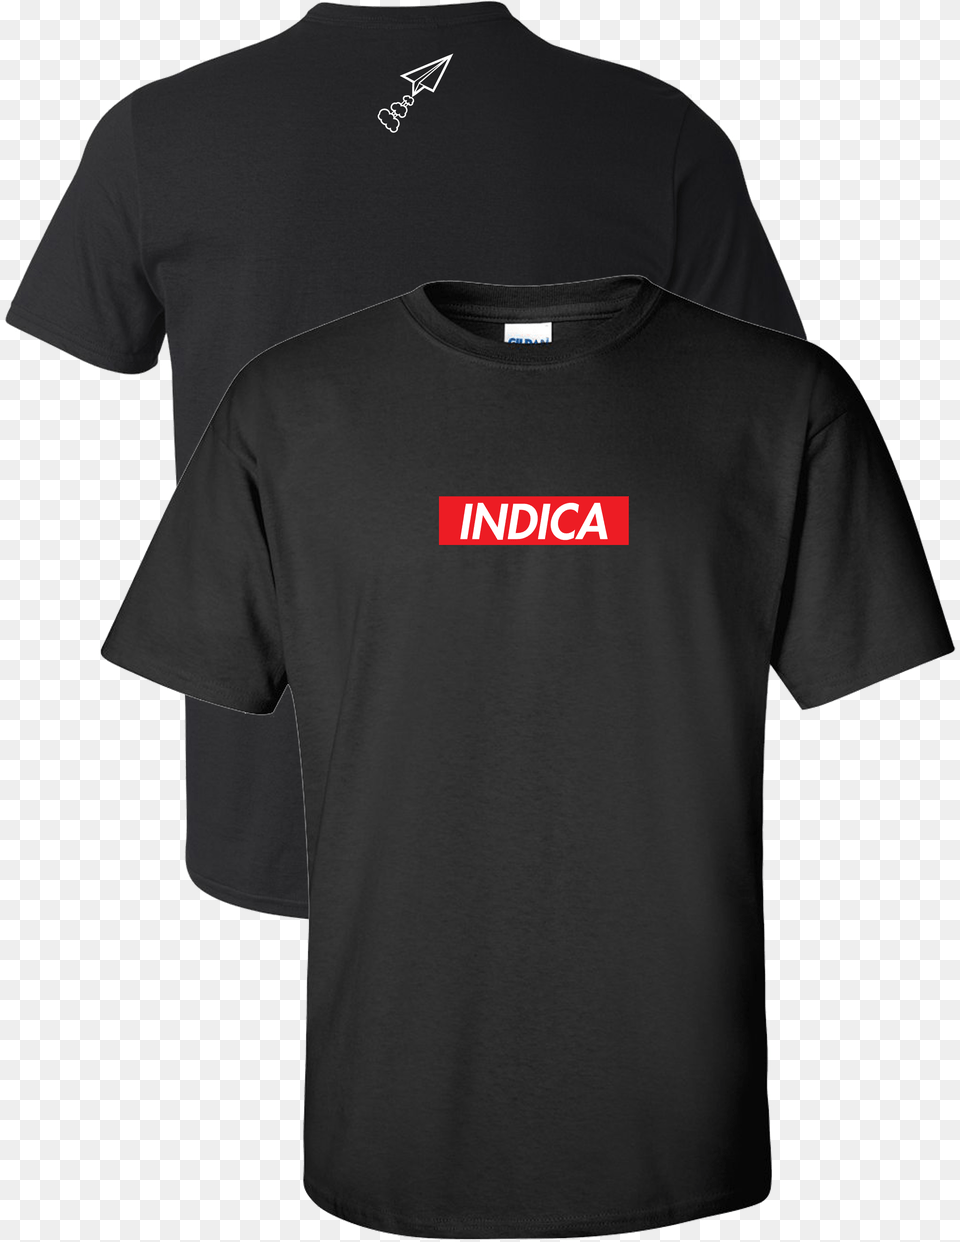 The Herban Legends Indica Tee In Black Shirt, Clothing, T-shirt Free Transparent Png